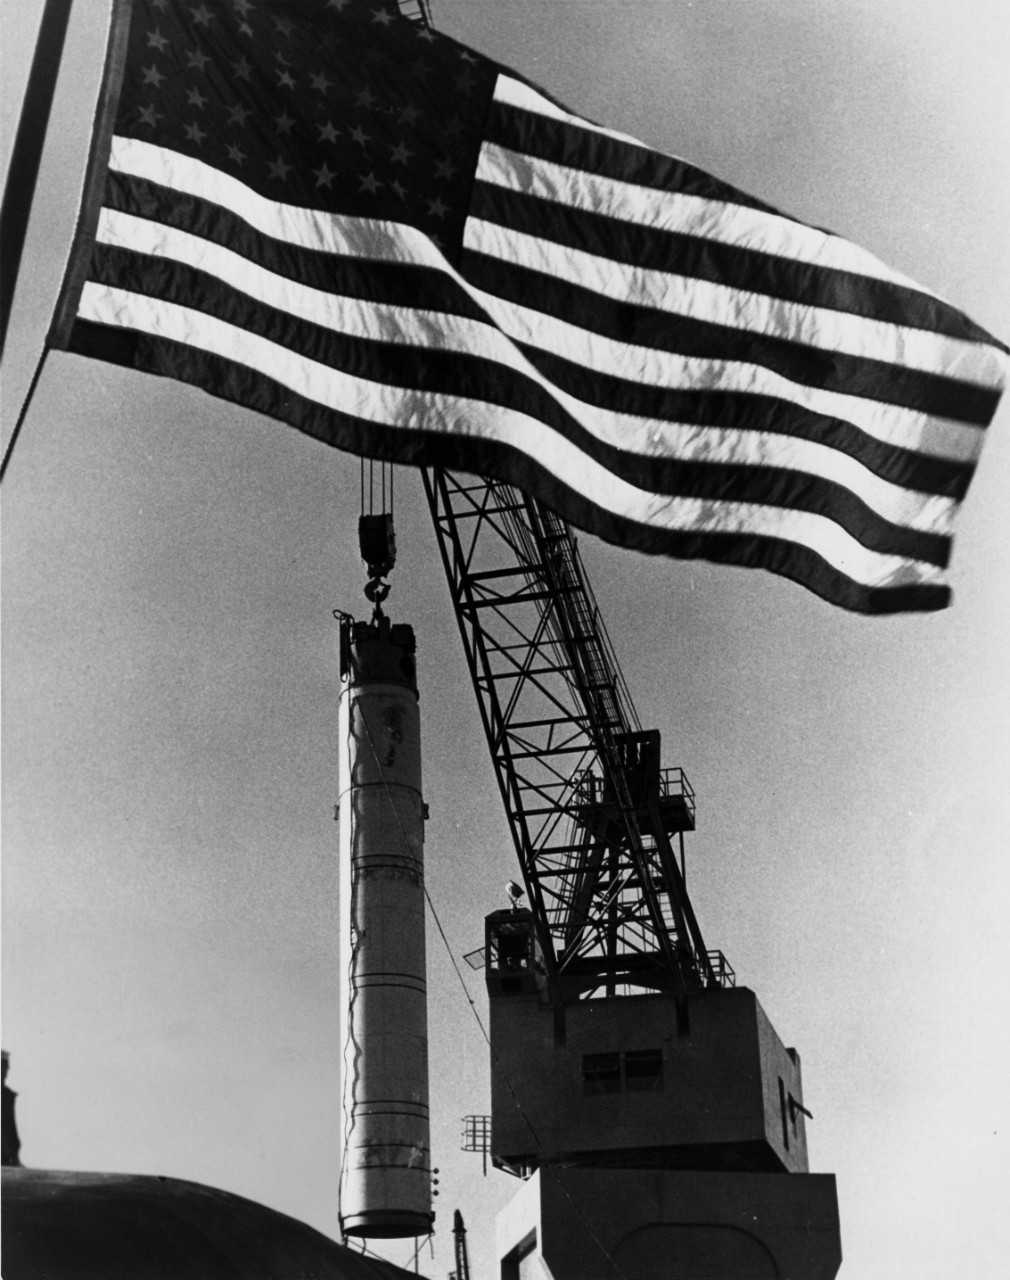 <p>L55-15.02.17 Polaris Missile Canister Lowered into Firing Tube on USS George Washington (SSBN-598)</p>
